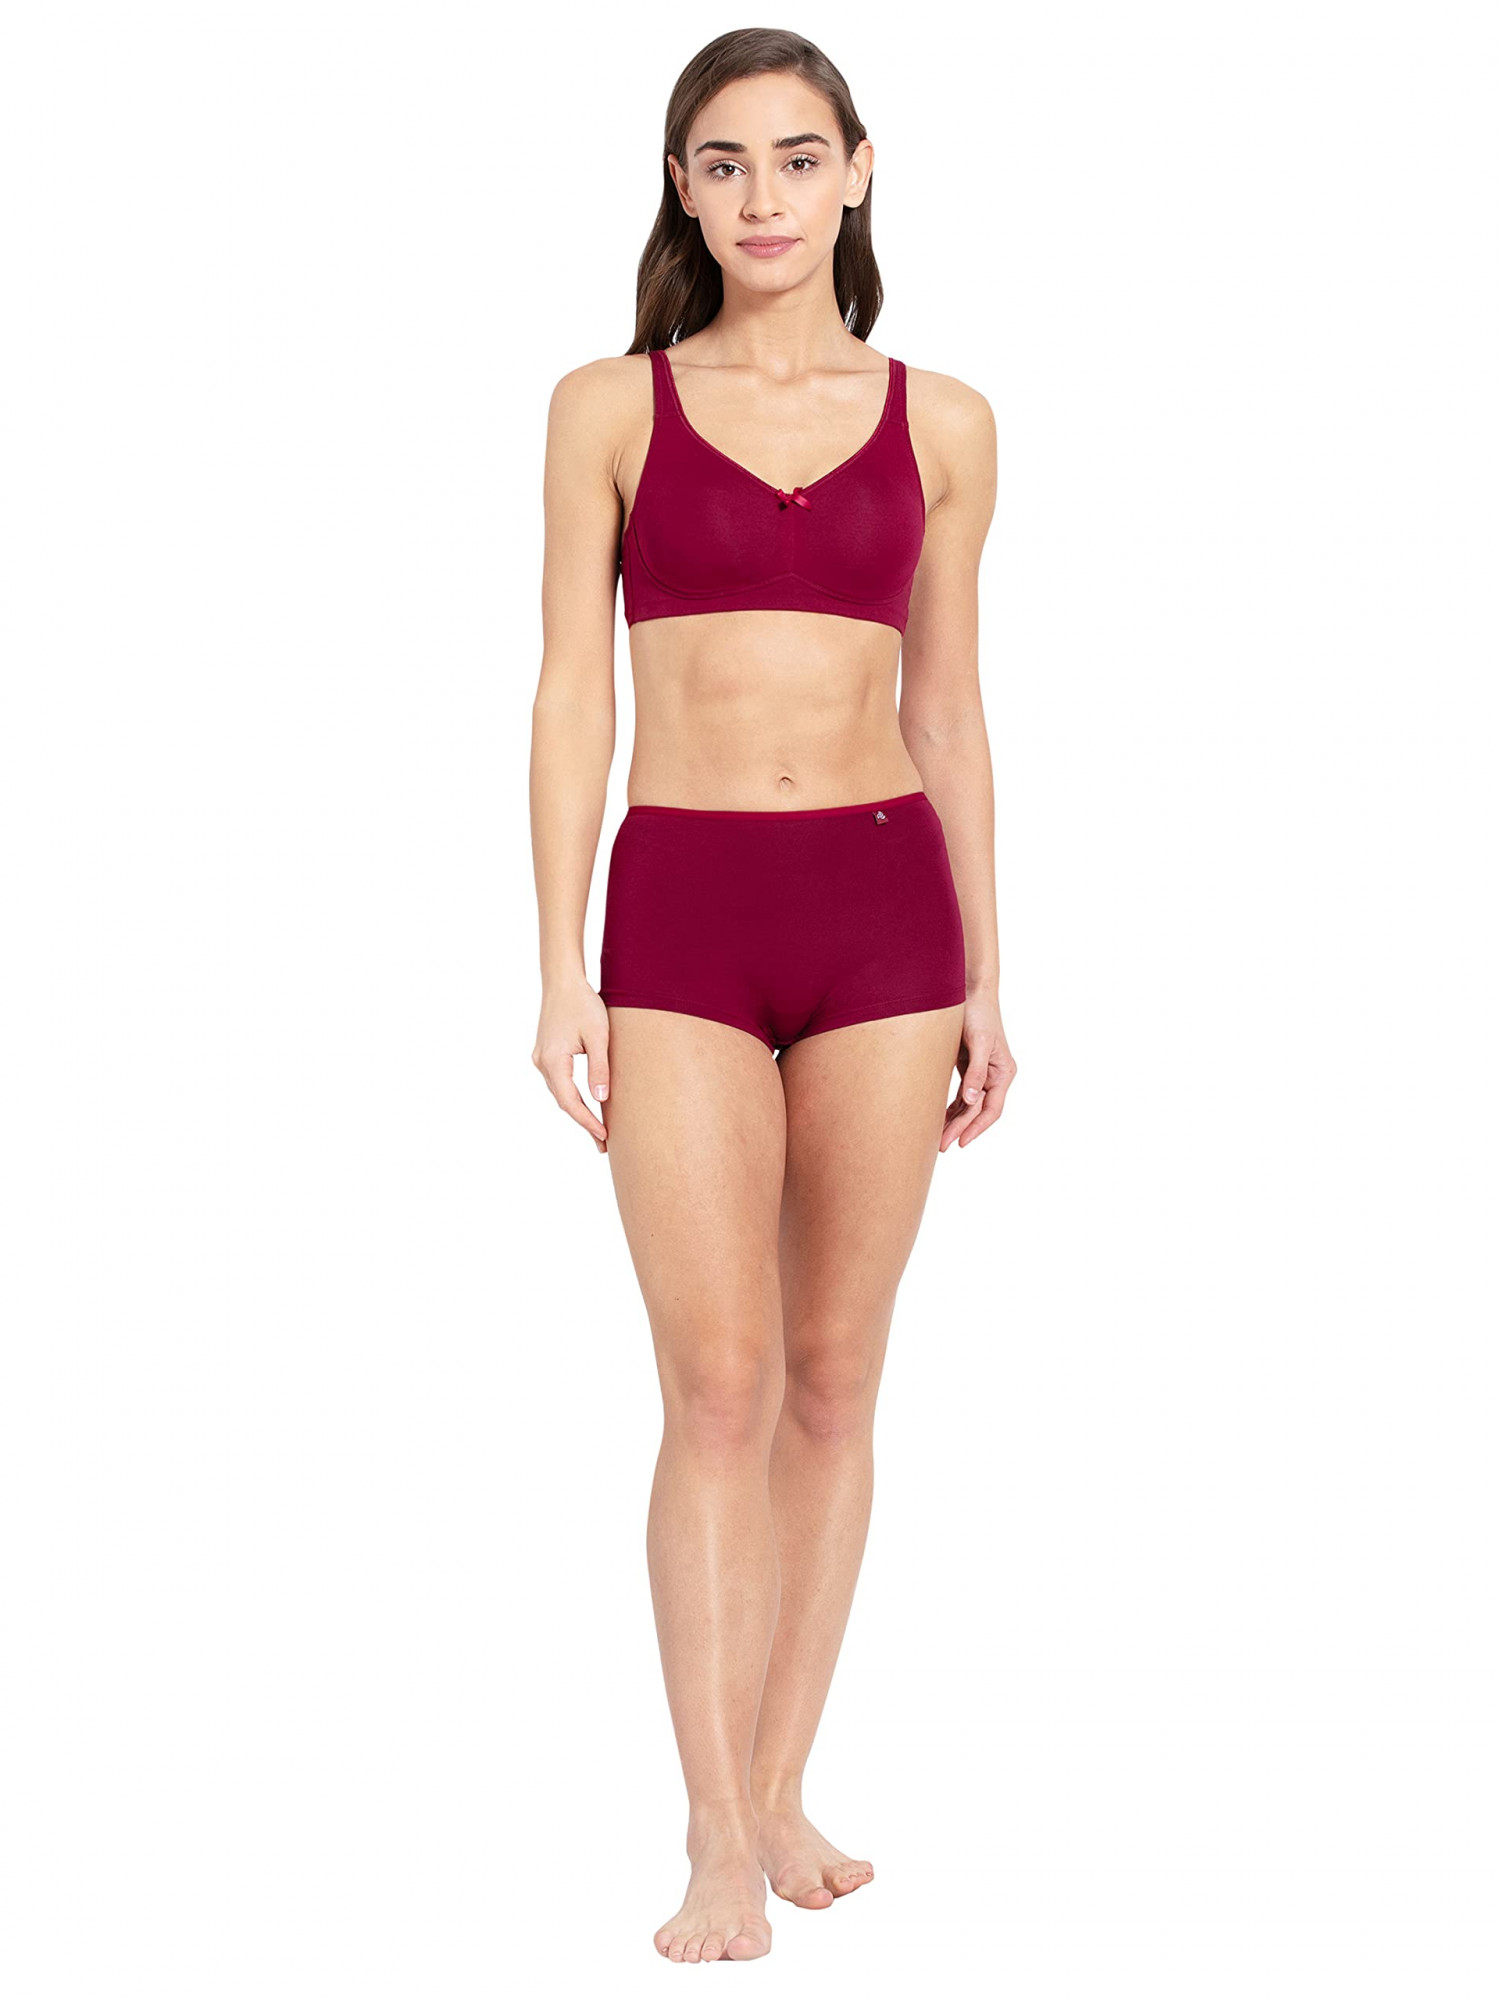 https://www.fastemi.com/uploads/fastemicom/products/jockey-fe41-womenamp039s-wirefree-non-padded-super-combed-cotton-elastane-stretch-full-coverage-everyday-bra-with-concealed-shaper-panel-and-broad-fabric-strapsbeet-red36csize-m-190820543857346_l.jpg